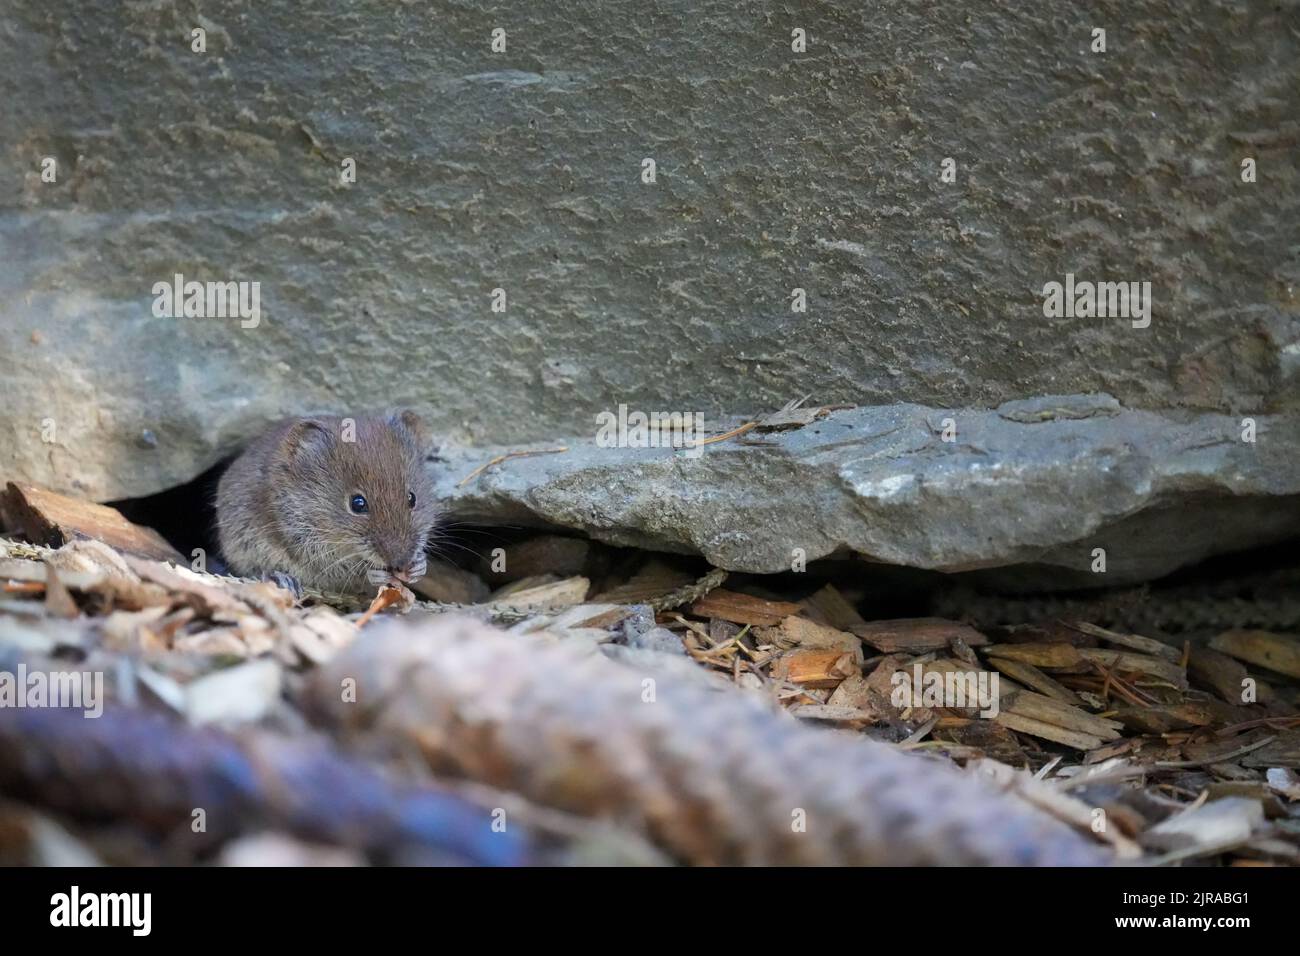 The close-up view of a tundra vole rodent on the wood chips by the wall Stock Photo